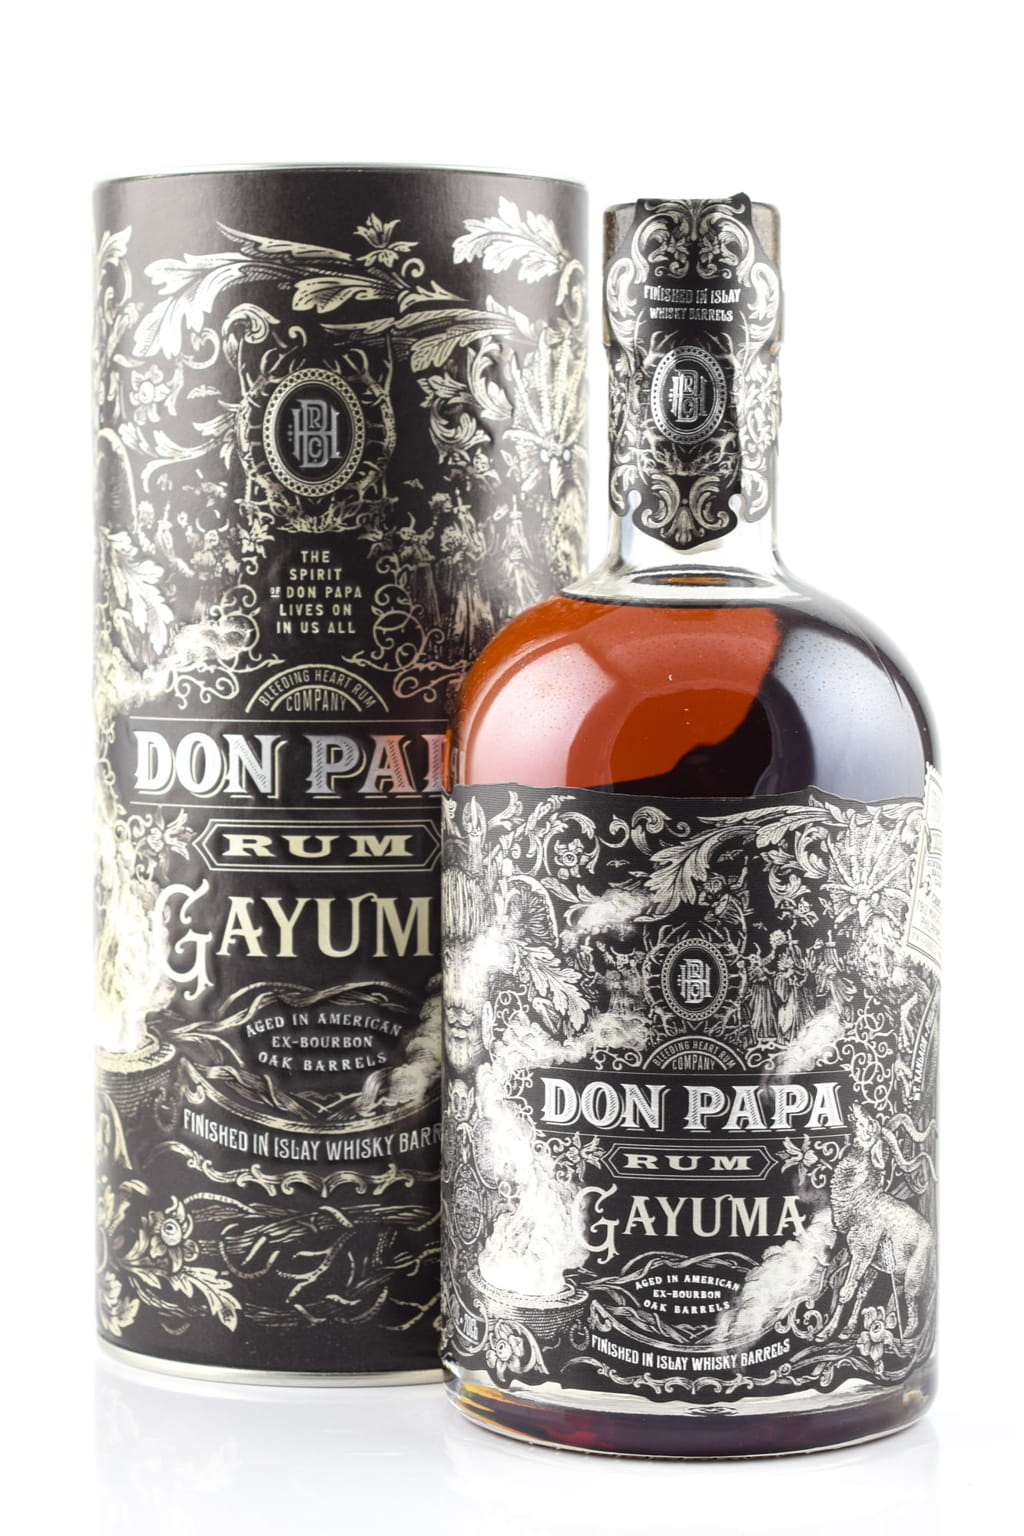 ᐅ Don Papa Gayuma the | Home Malts of edition special online - - buy now